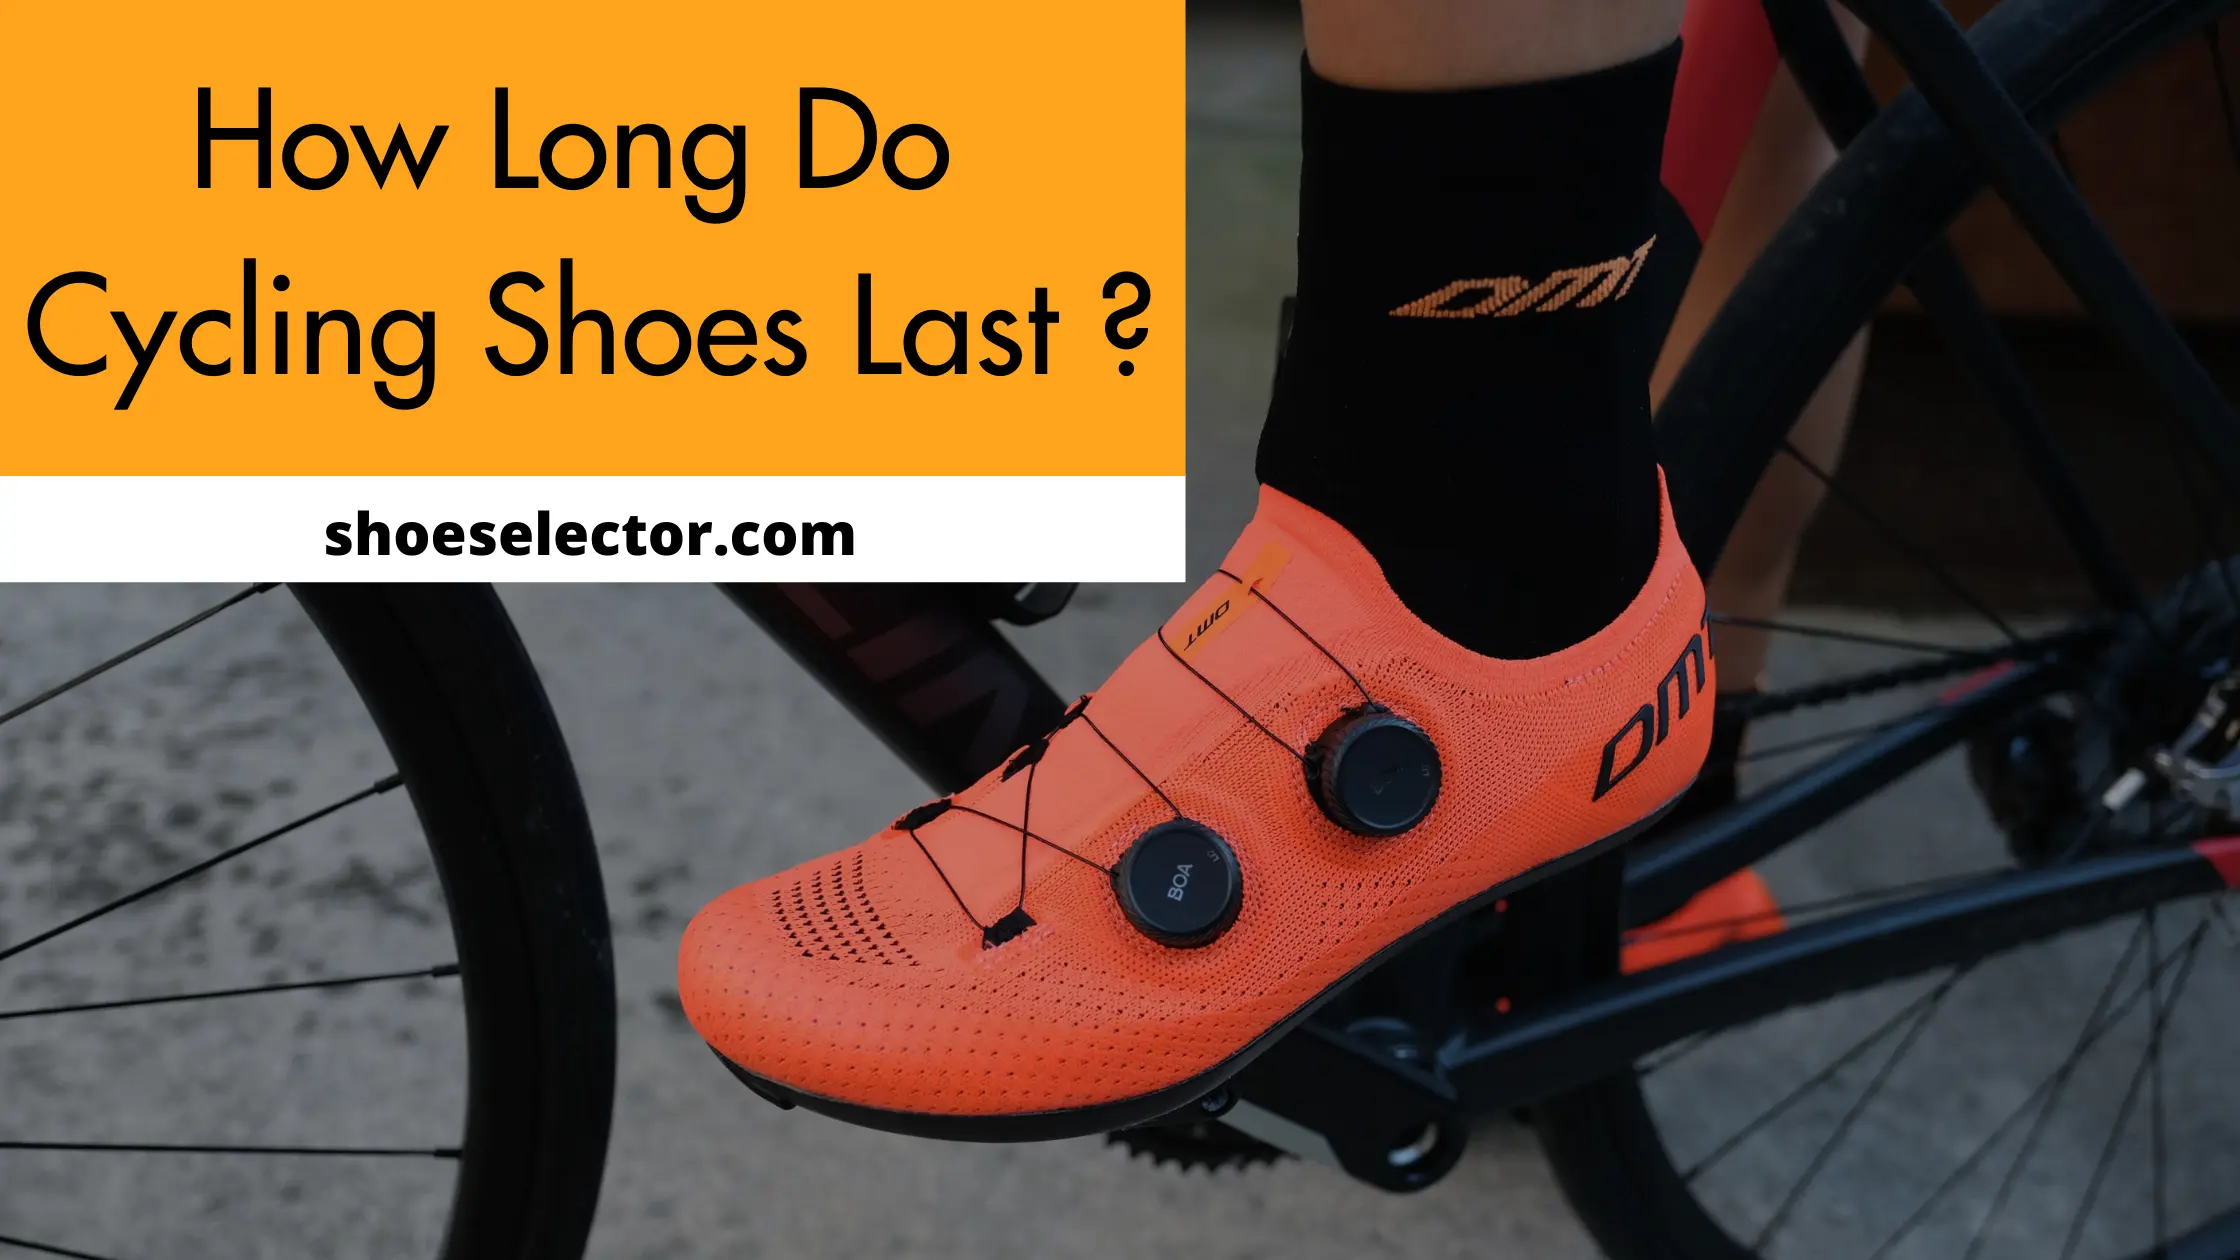 How Long do Cycling Shoes Last? - Simple Guide